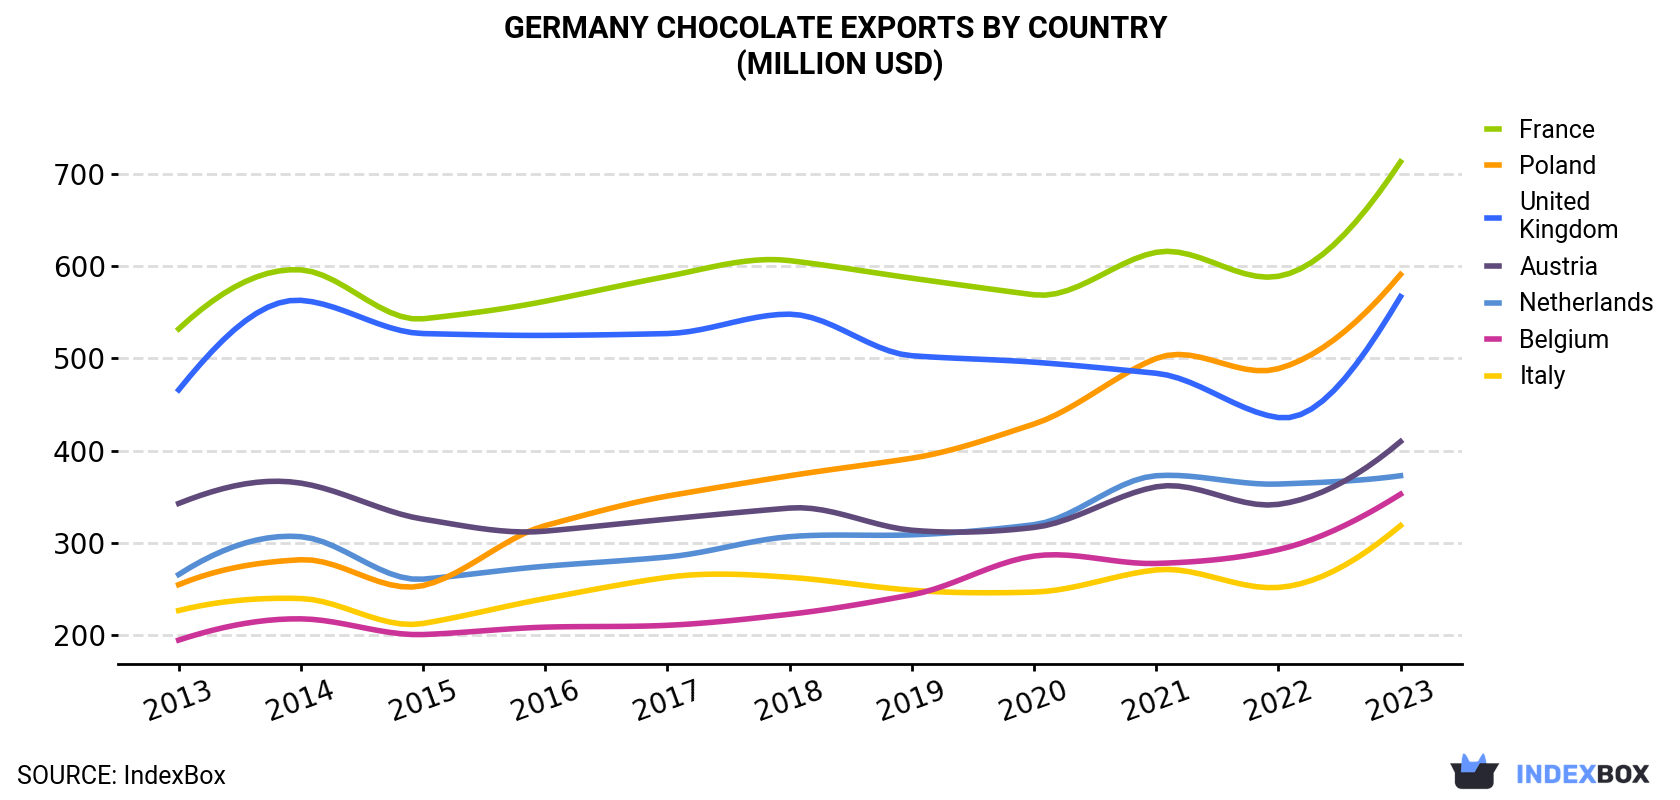 Germany Chocolate Exports By Country (Million USD)